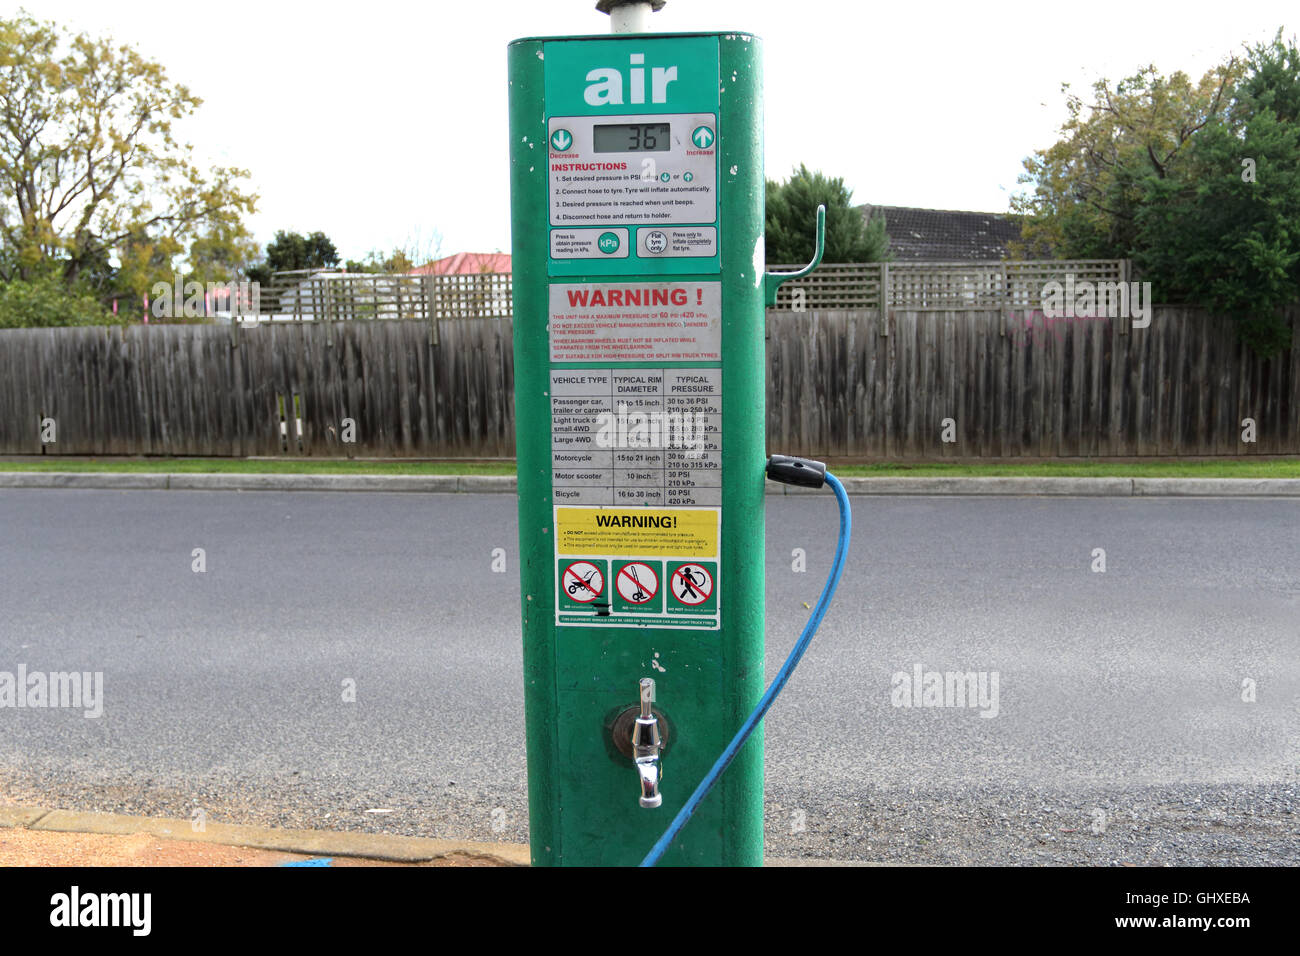 Nearest Gas Station With Air Pump Hotsell, 57% Off | Www.Resortrybnicek.Cz